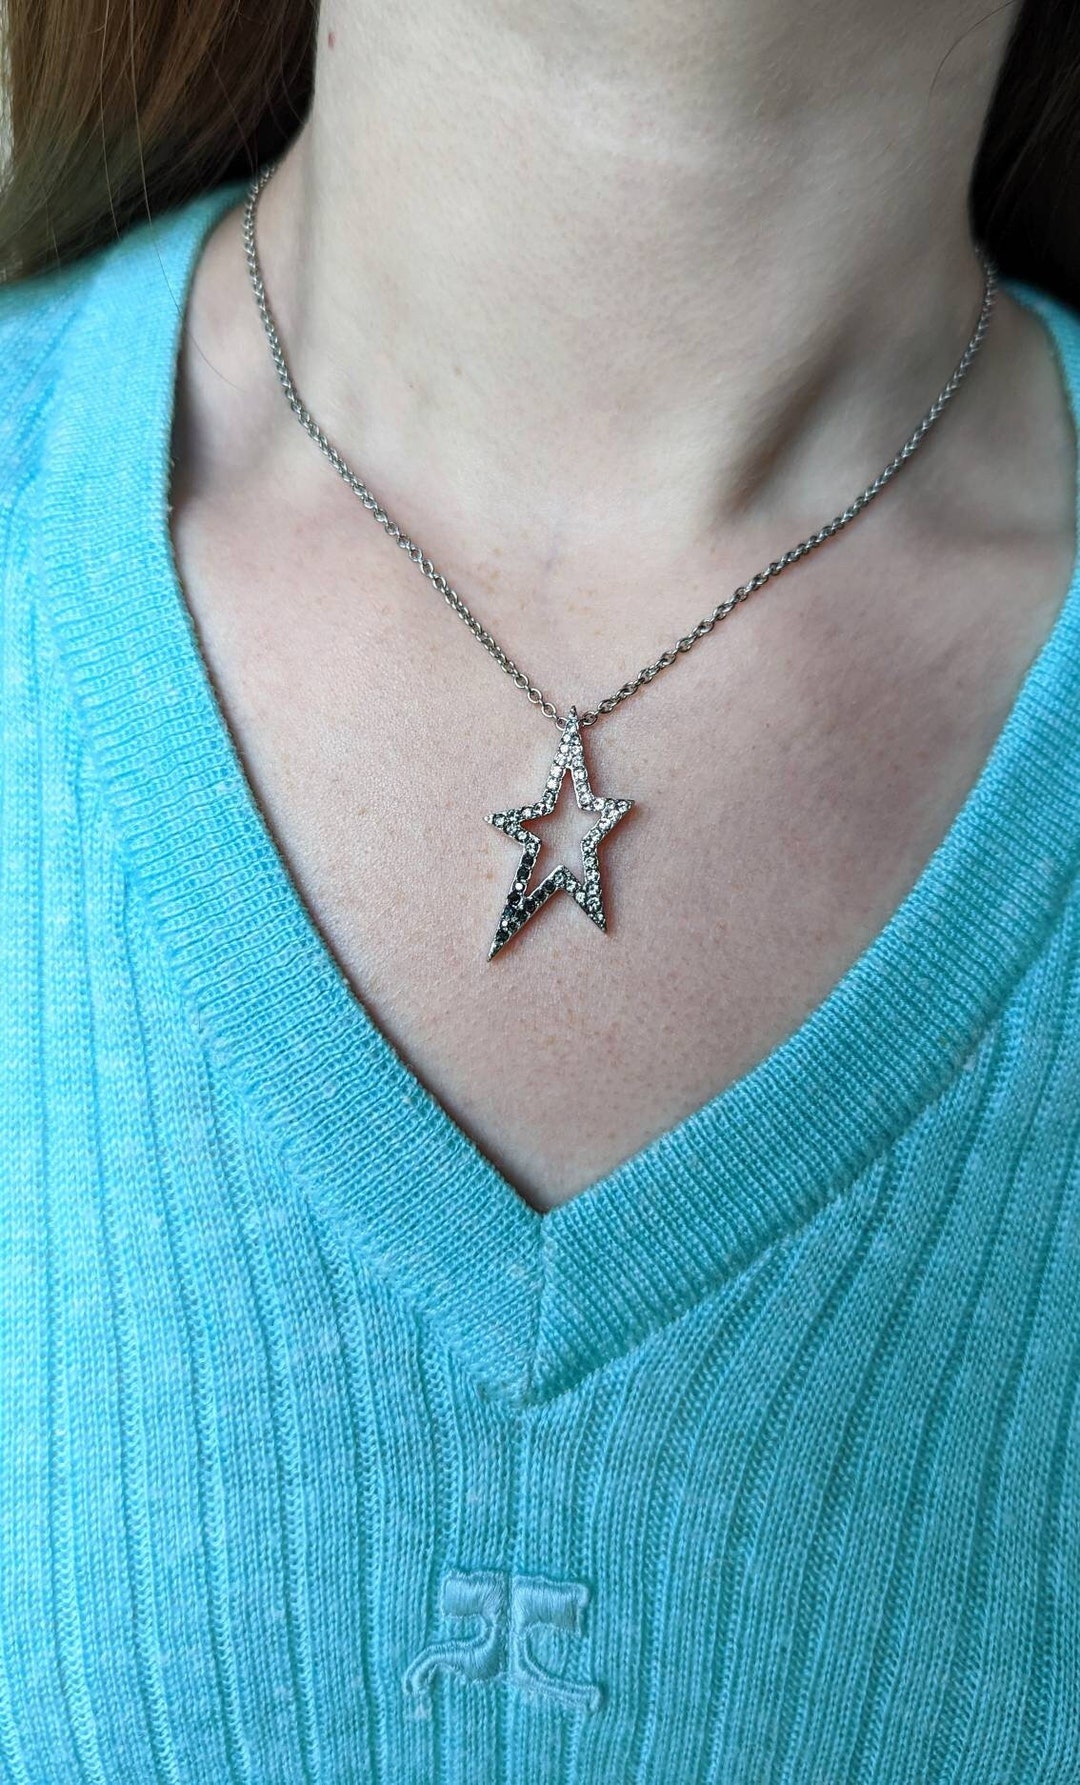 little star necklace – dokidokiaccessories